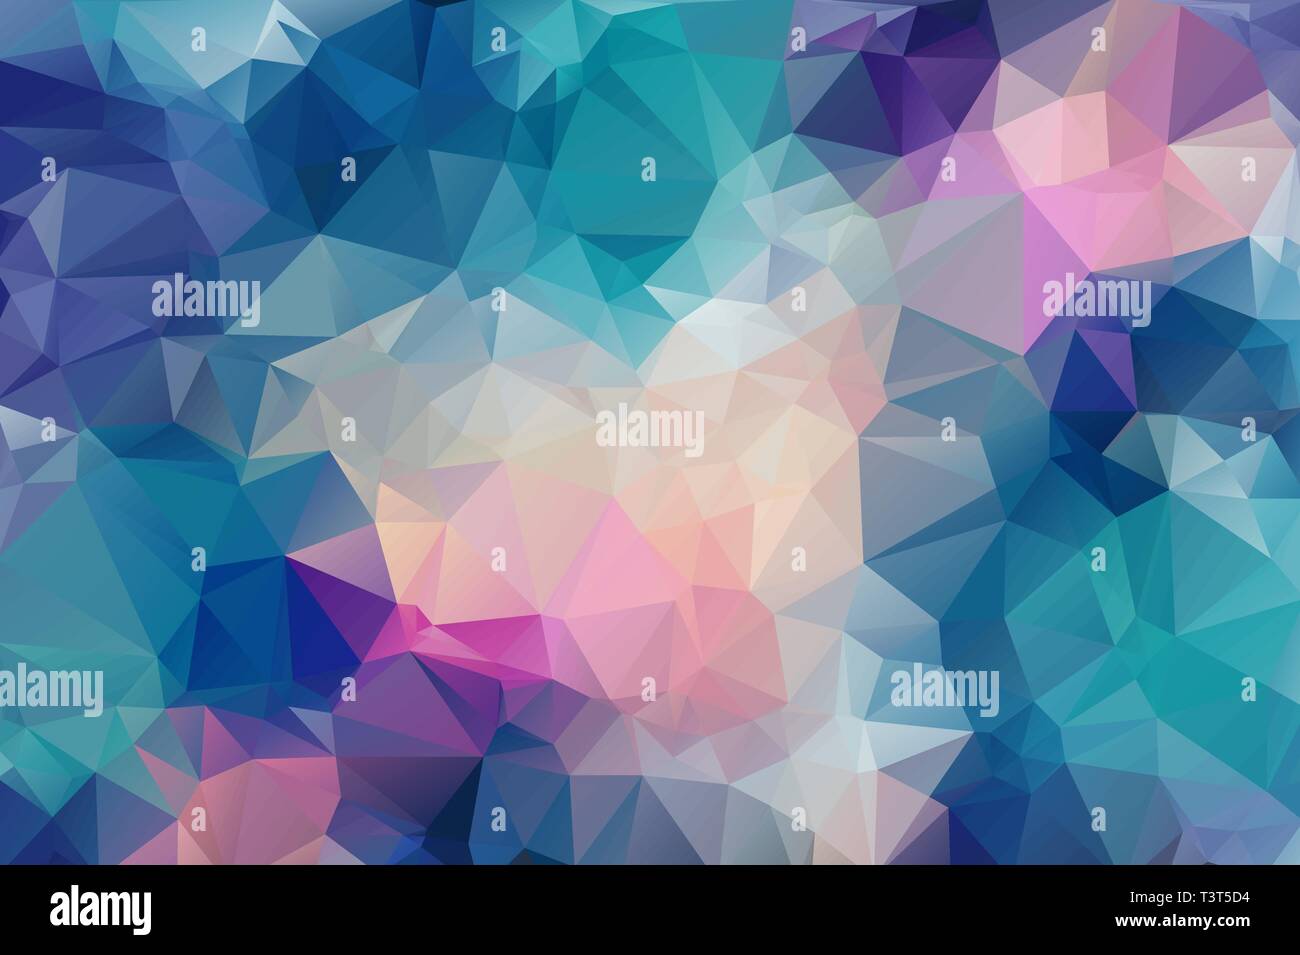 Cool purple, blue abstract background of triangles. Stock Vector